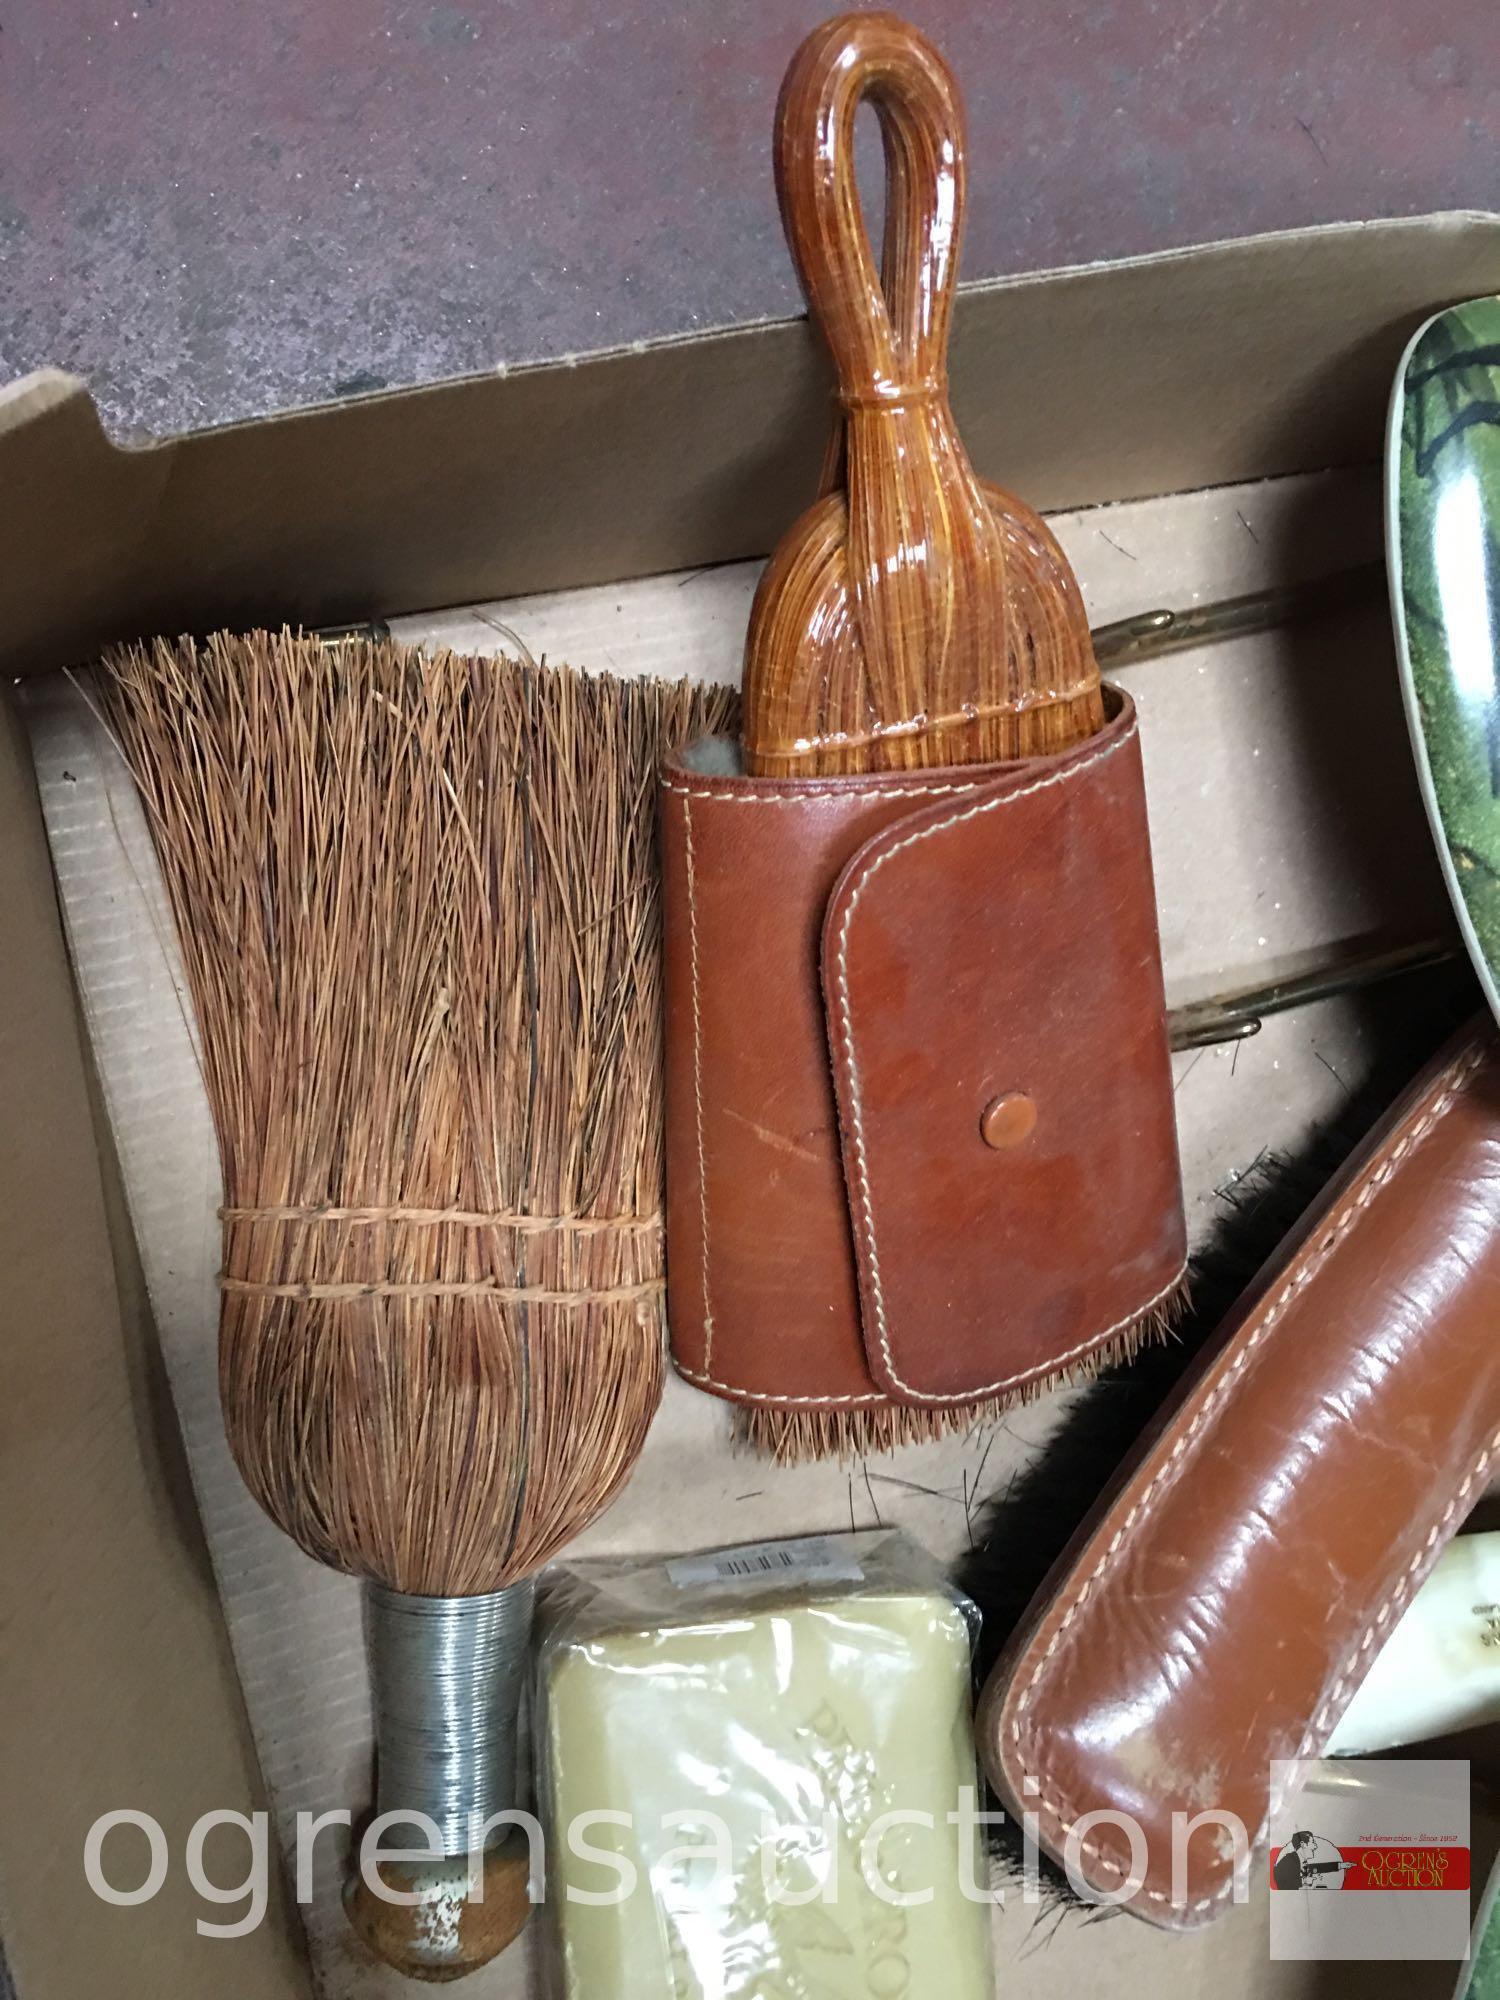 Vintage collectibles - shoe brushes, leather wrapped broom, Scotland shoe horn, soap, wall hooks